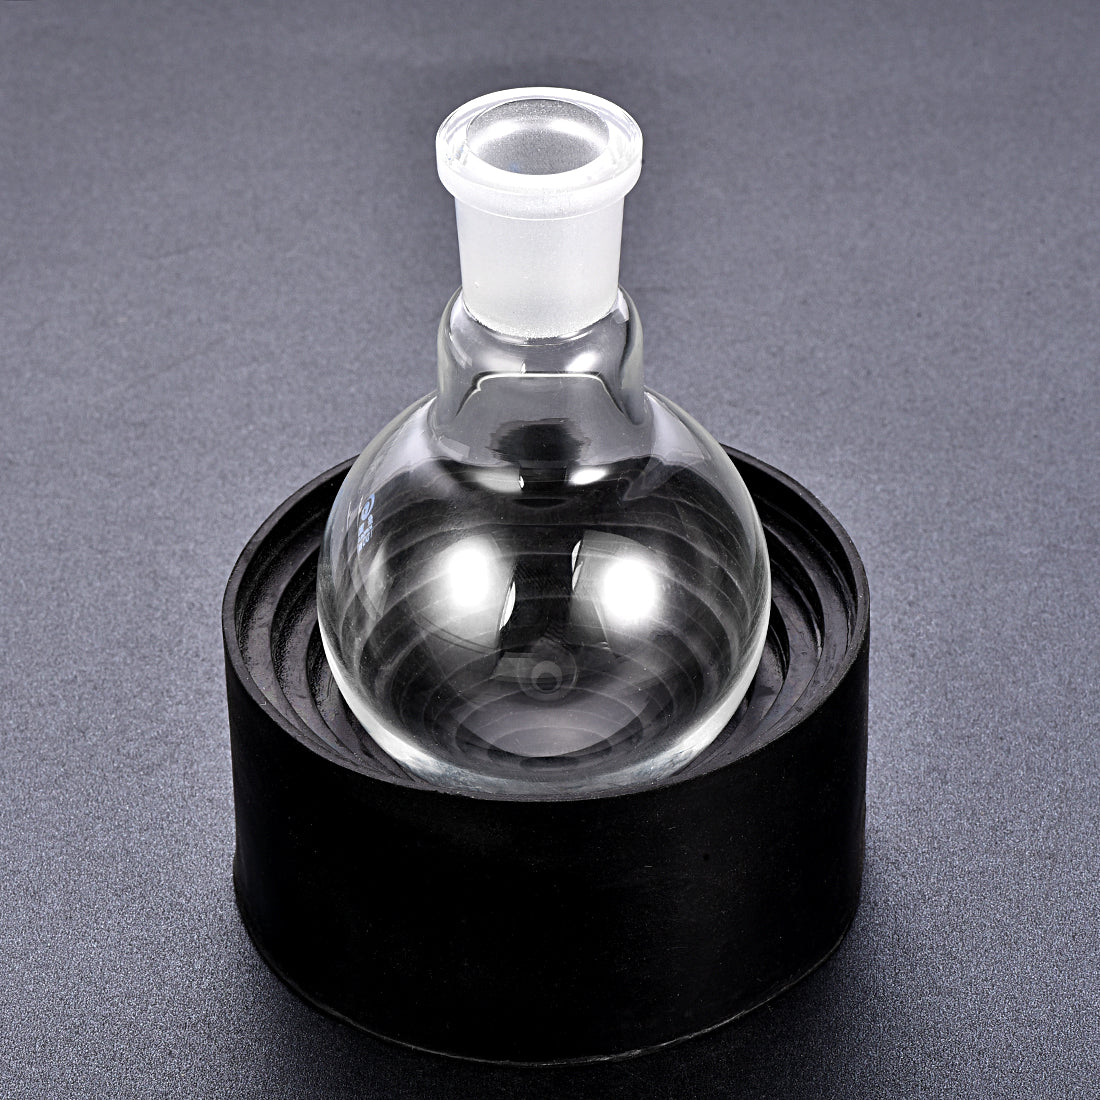 uxcell Uxcell Lab Flask Support Rubber Stand 90mm Diameter Round Bottom Holder for 50ml-1000ml Flasks Black